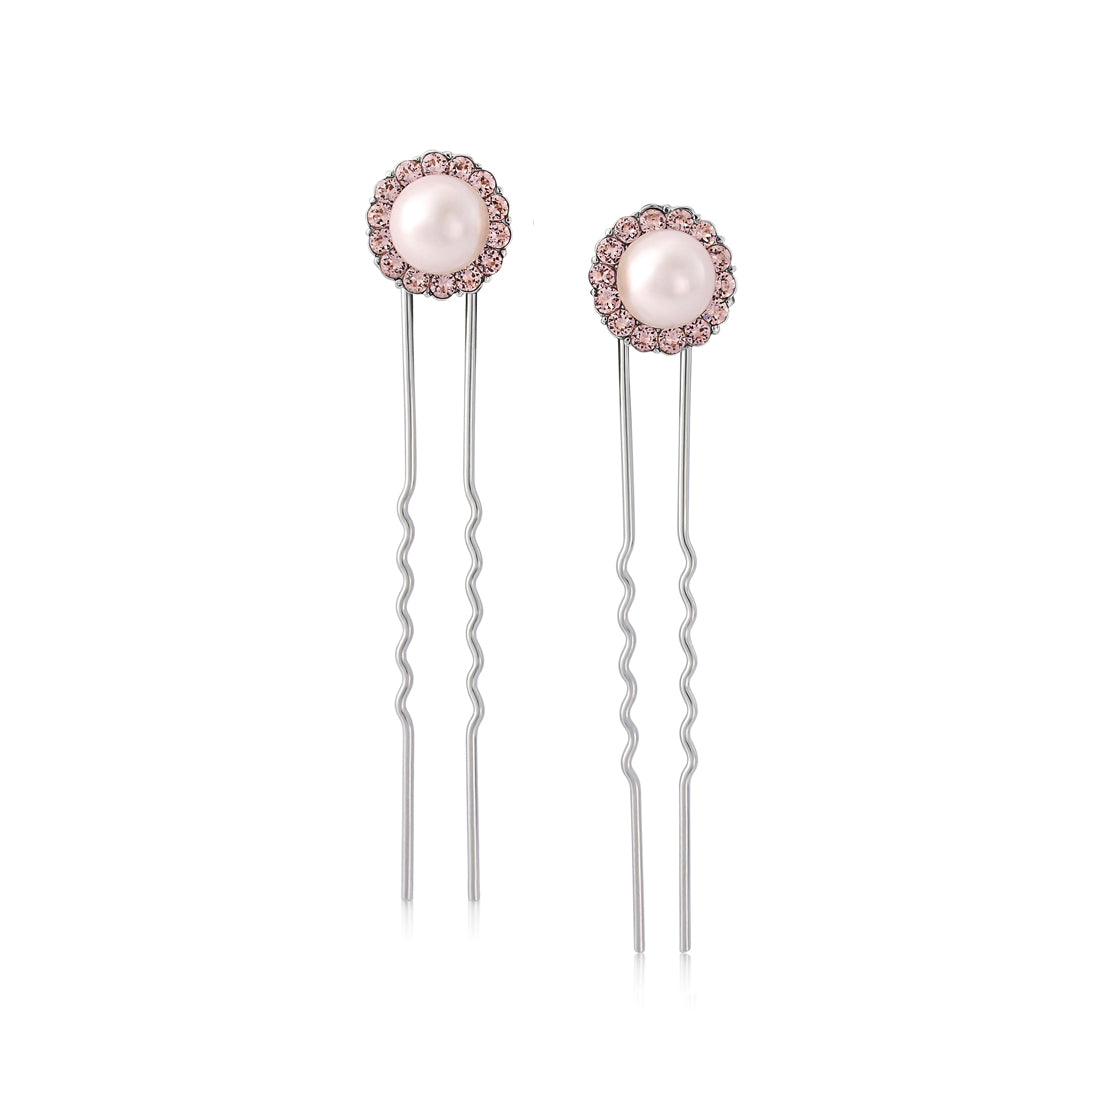 Misty Rose Pink Pearl Hair Pins for Bridesmaids & Weddings